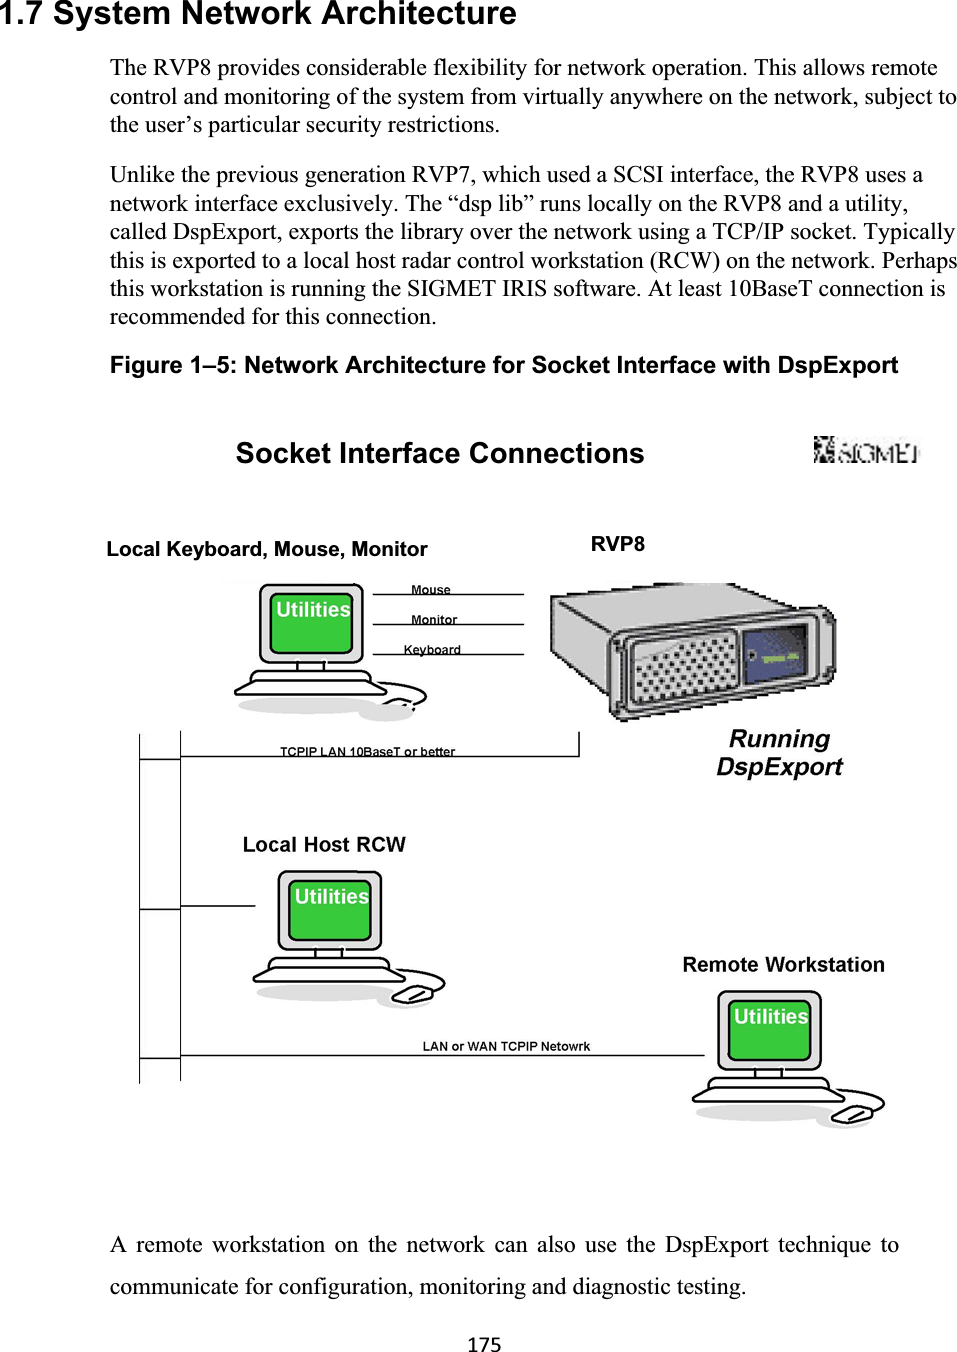 1751.7 System Network Architecture The RVP8 provides considerable flexibility for network operation. This allows remote control and monitoring of the system from virtually anywhere on the network, subject to the user’s particular security restrictions.  Unlike the previous generation RVP7, which used a SCSI interface, the RVP8 uses a network interface exclusively. The “dsp lib” runs locally on the RVP8 and a utility, called DspExport, exports the library over the network using a TCP/IP socket. Typically this is exported to a local host radar control workstation (RCW) on the network. Perhaps this workstation is running the SIGMET IRIS software. At least 10BaseT connection is recommended for this connection.  Figure 1–5: Network Architecture for Socket Interface with DspExport Socket Interface Connections RVP8Local Keyboard, Mouse, Monitor RunningDspExport Mouse MonitorKeyboardA remote workstation on the network can also use the DspExport technique tocommunicate for configuration, monitoring and diagnostic testing.  